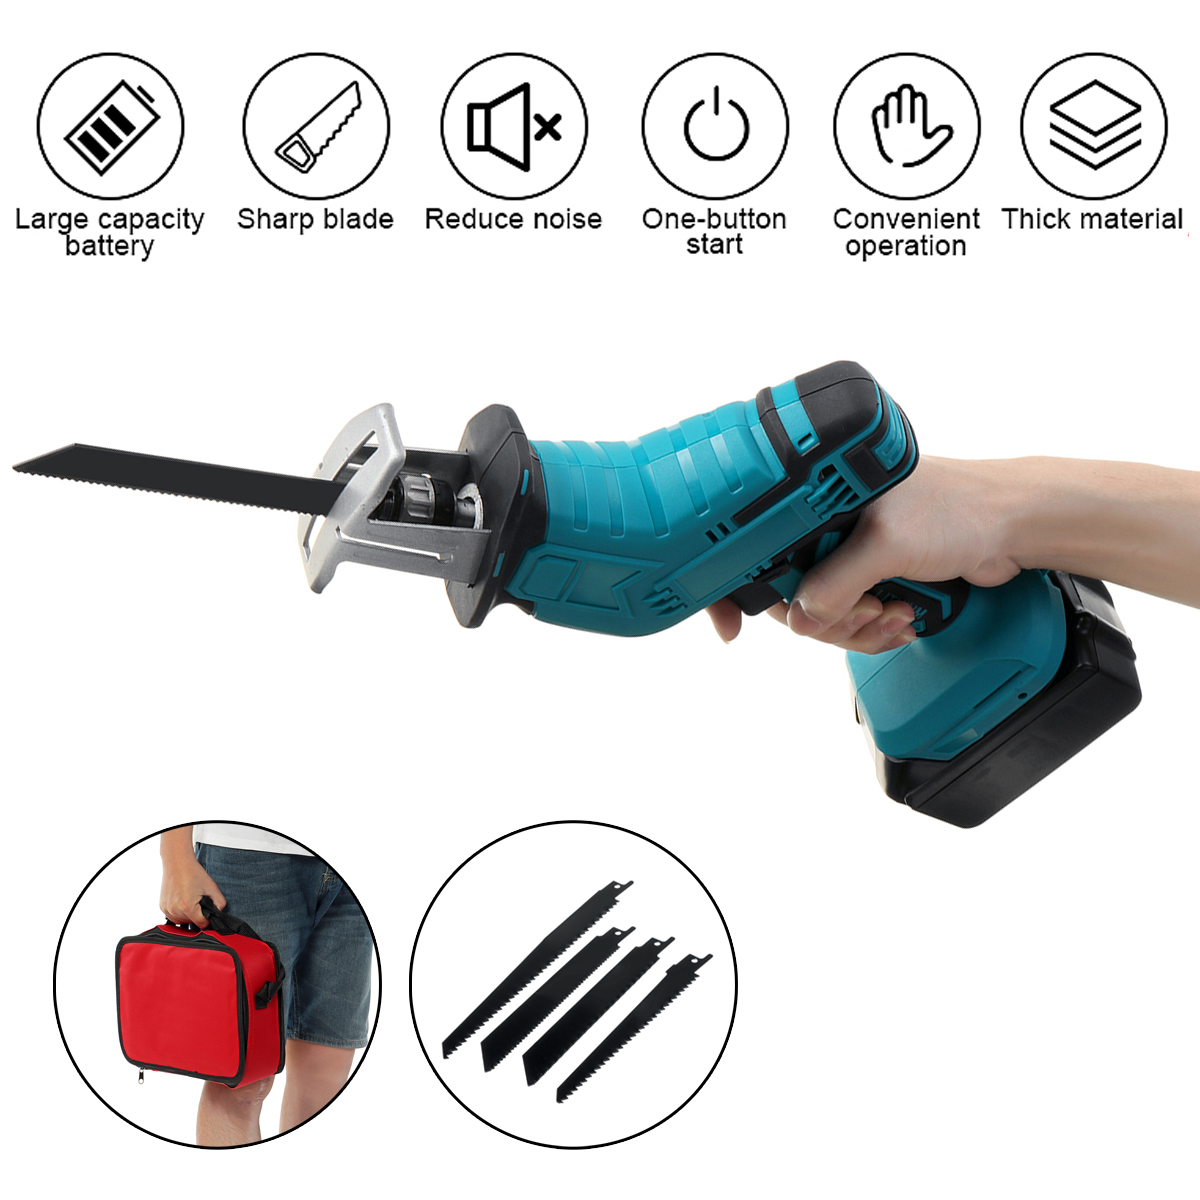 68V-Electric-Reciprocating-Saw-Outdoor-Woodworking-Cordless-Handheld-Saw-9000mah-1683596-4